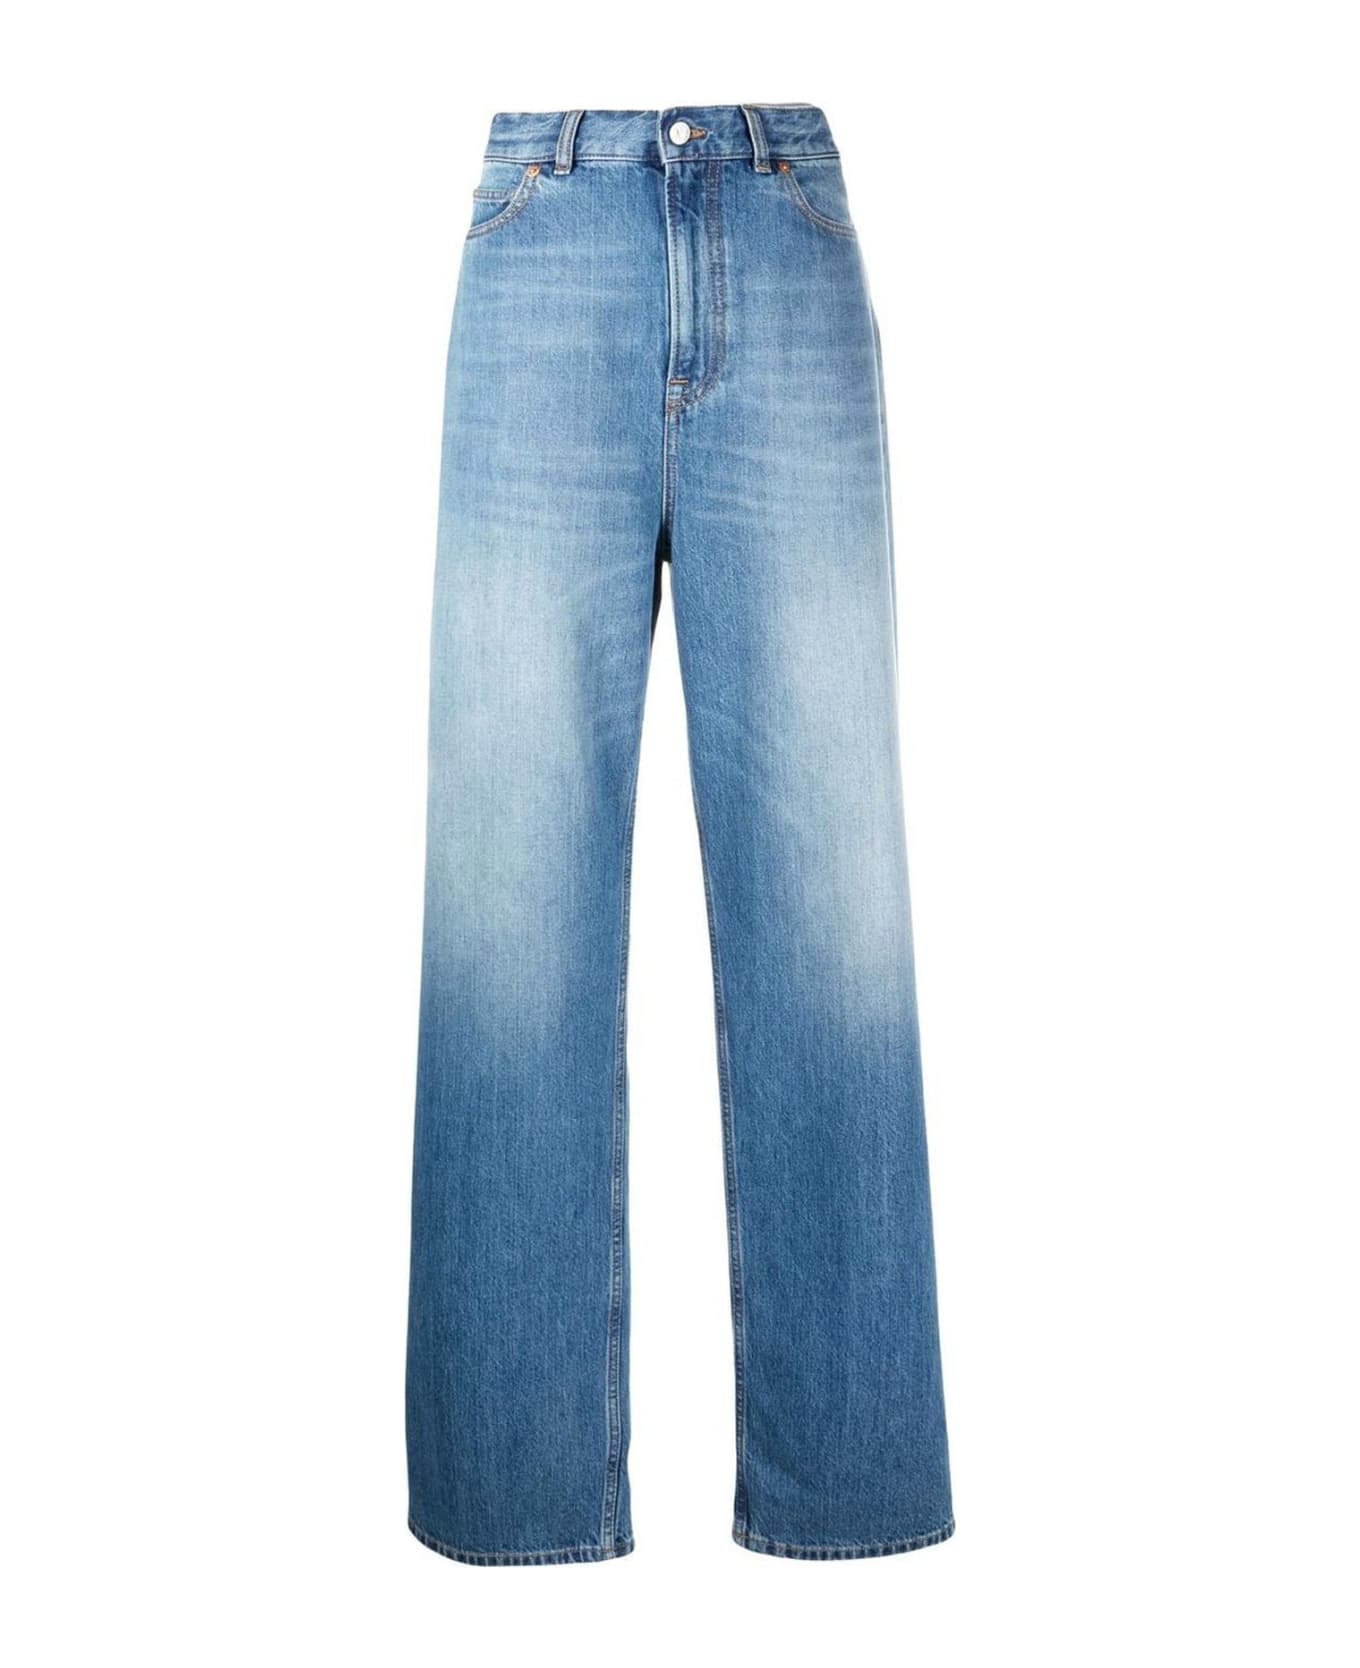 Valentino Archive Patch Jeans - Blue